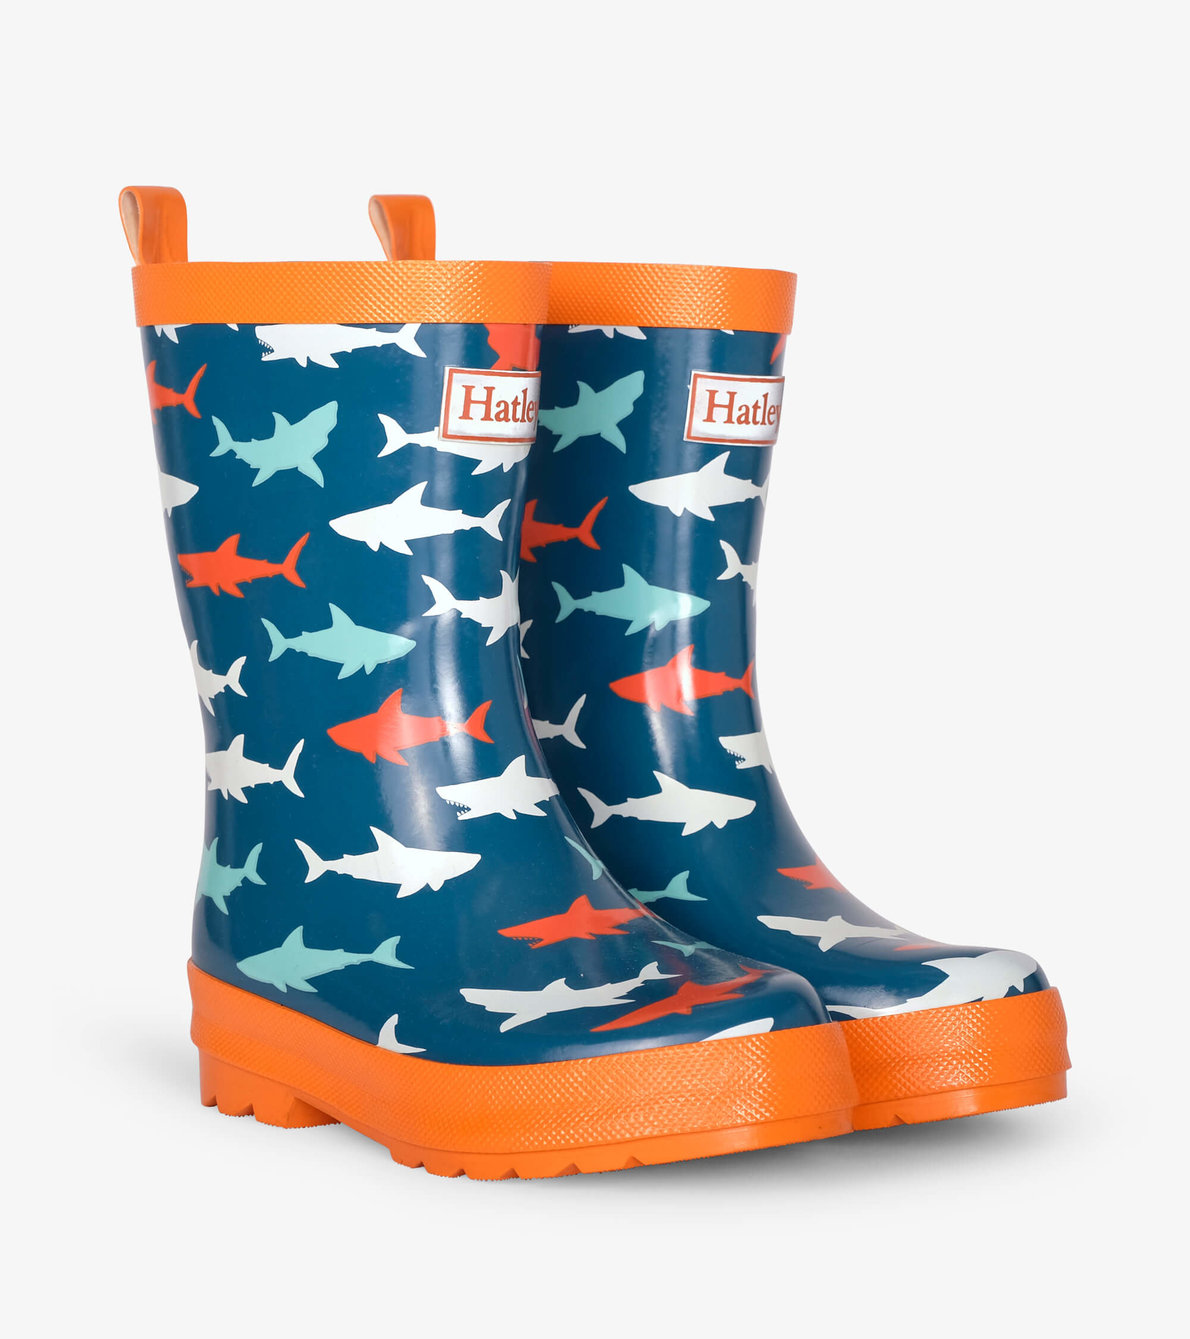 View larger image of Great White Sharks Shiny Rain Boots